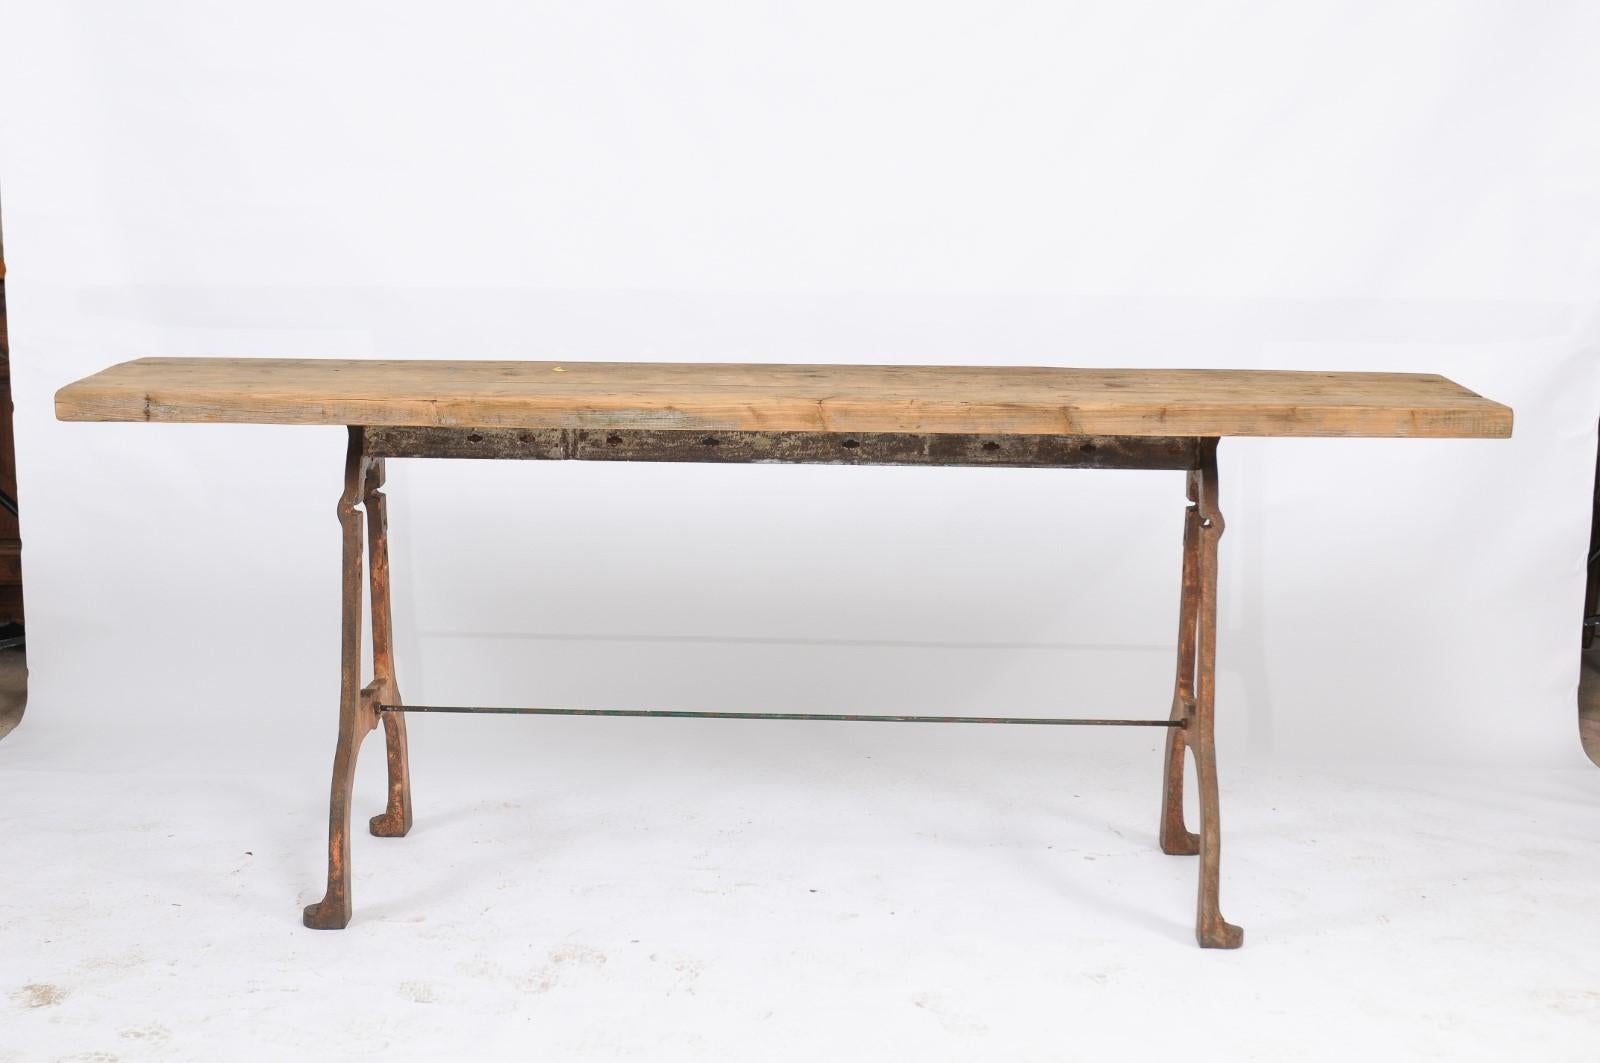 Rustic Southern French Long Iron and Oak Rectangular Console Table from the 1940s